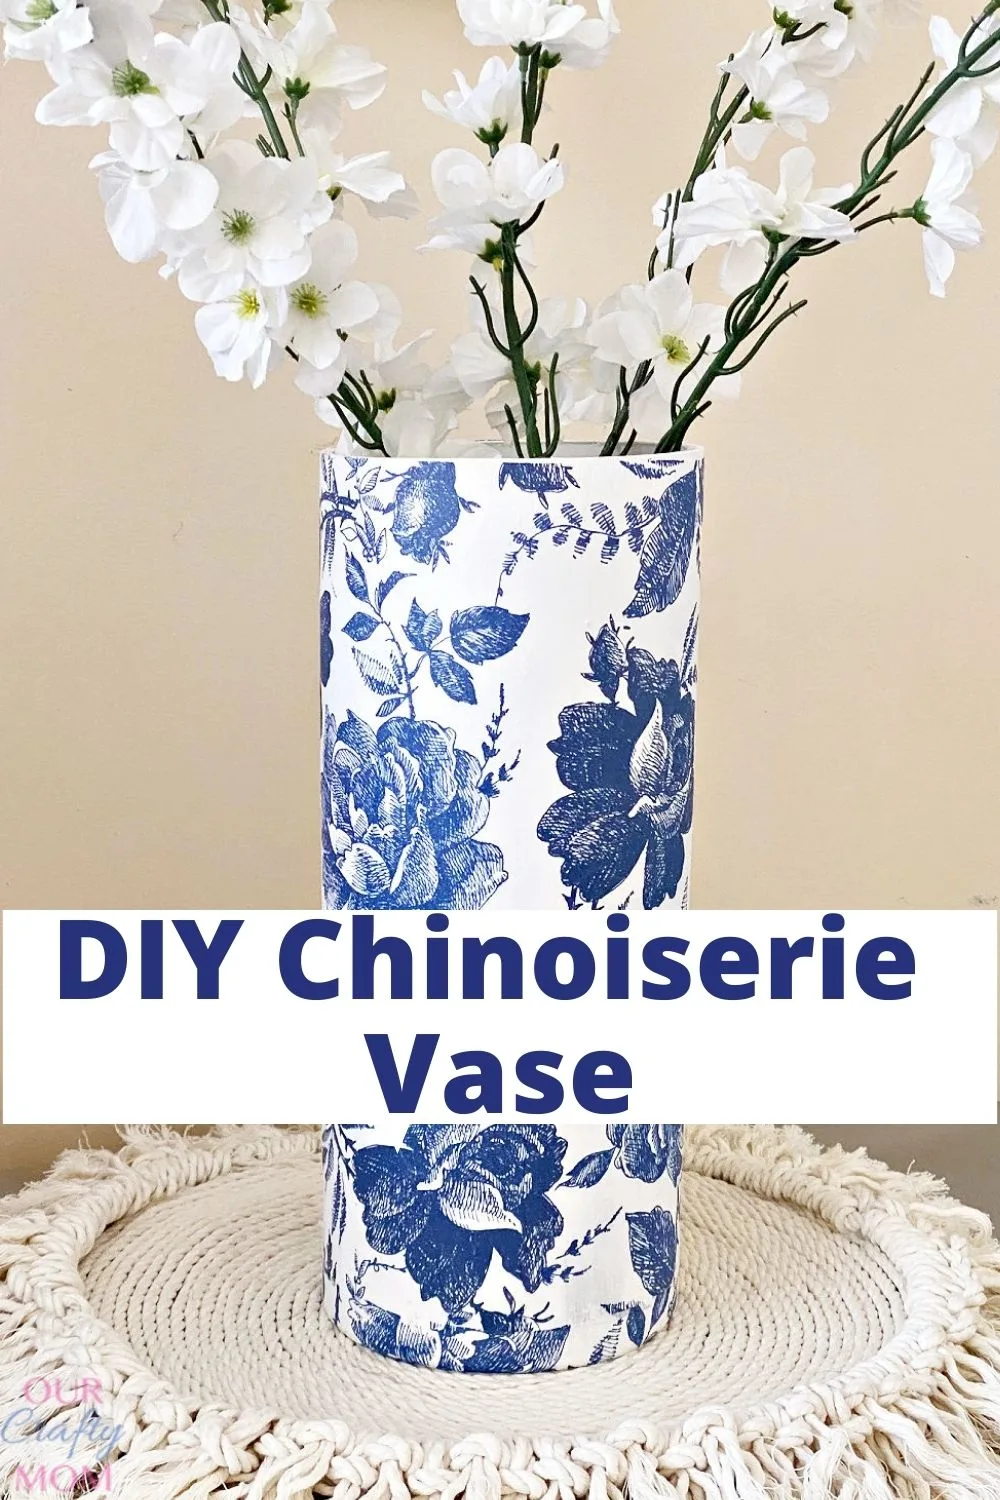 Use Mod Podge photo transfer medium to decorate vases with vintage